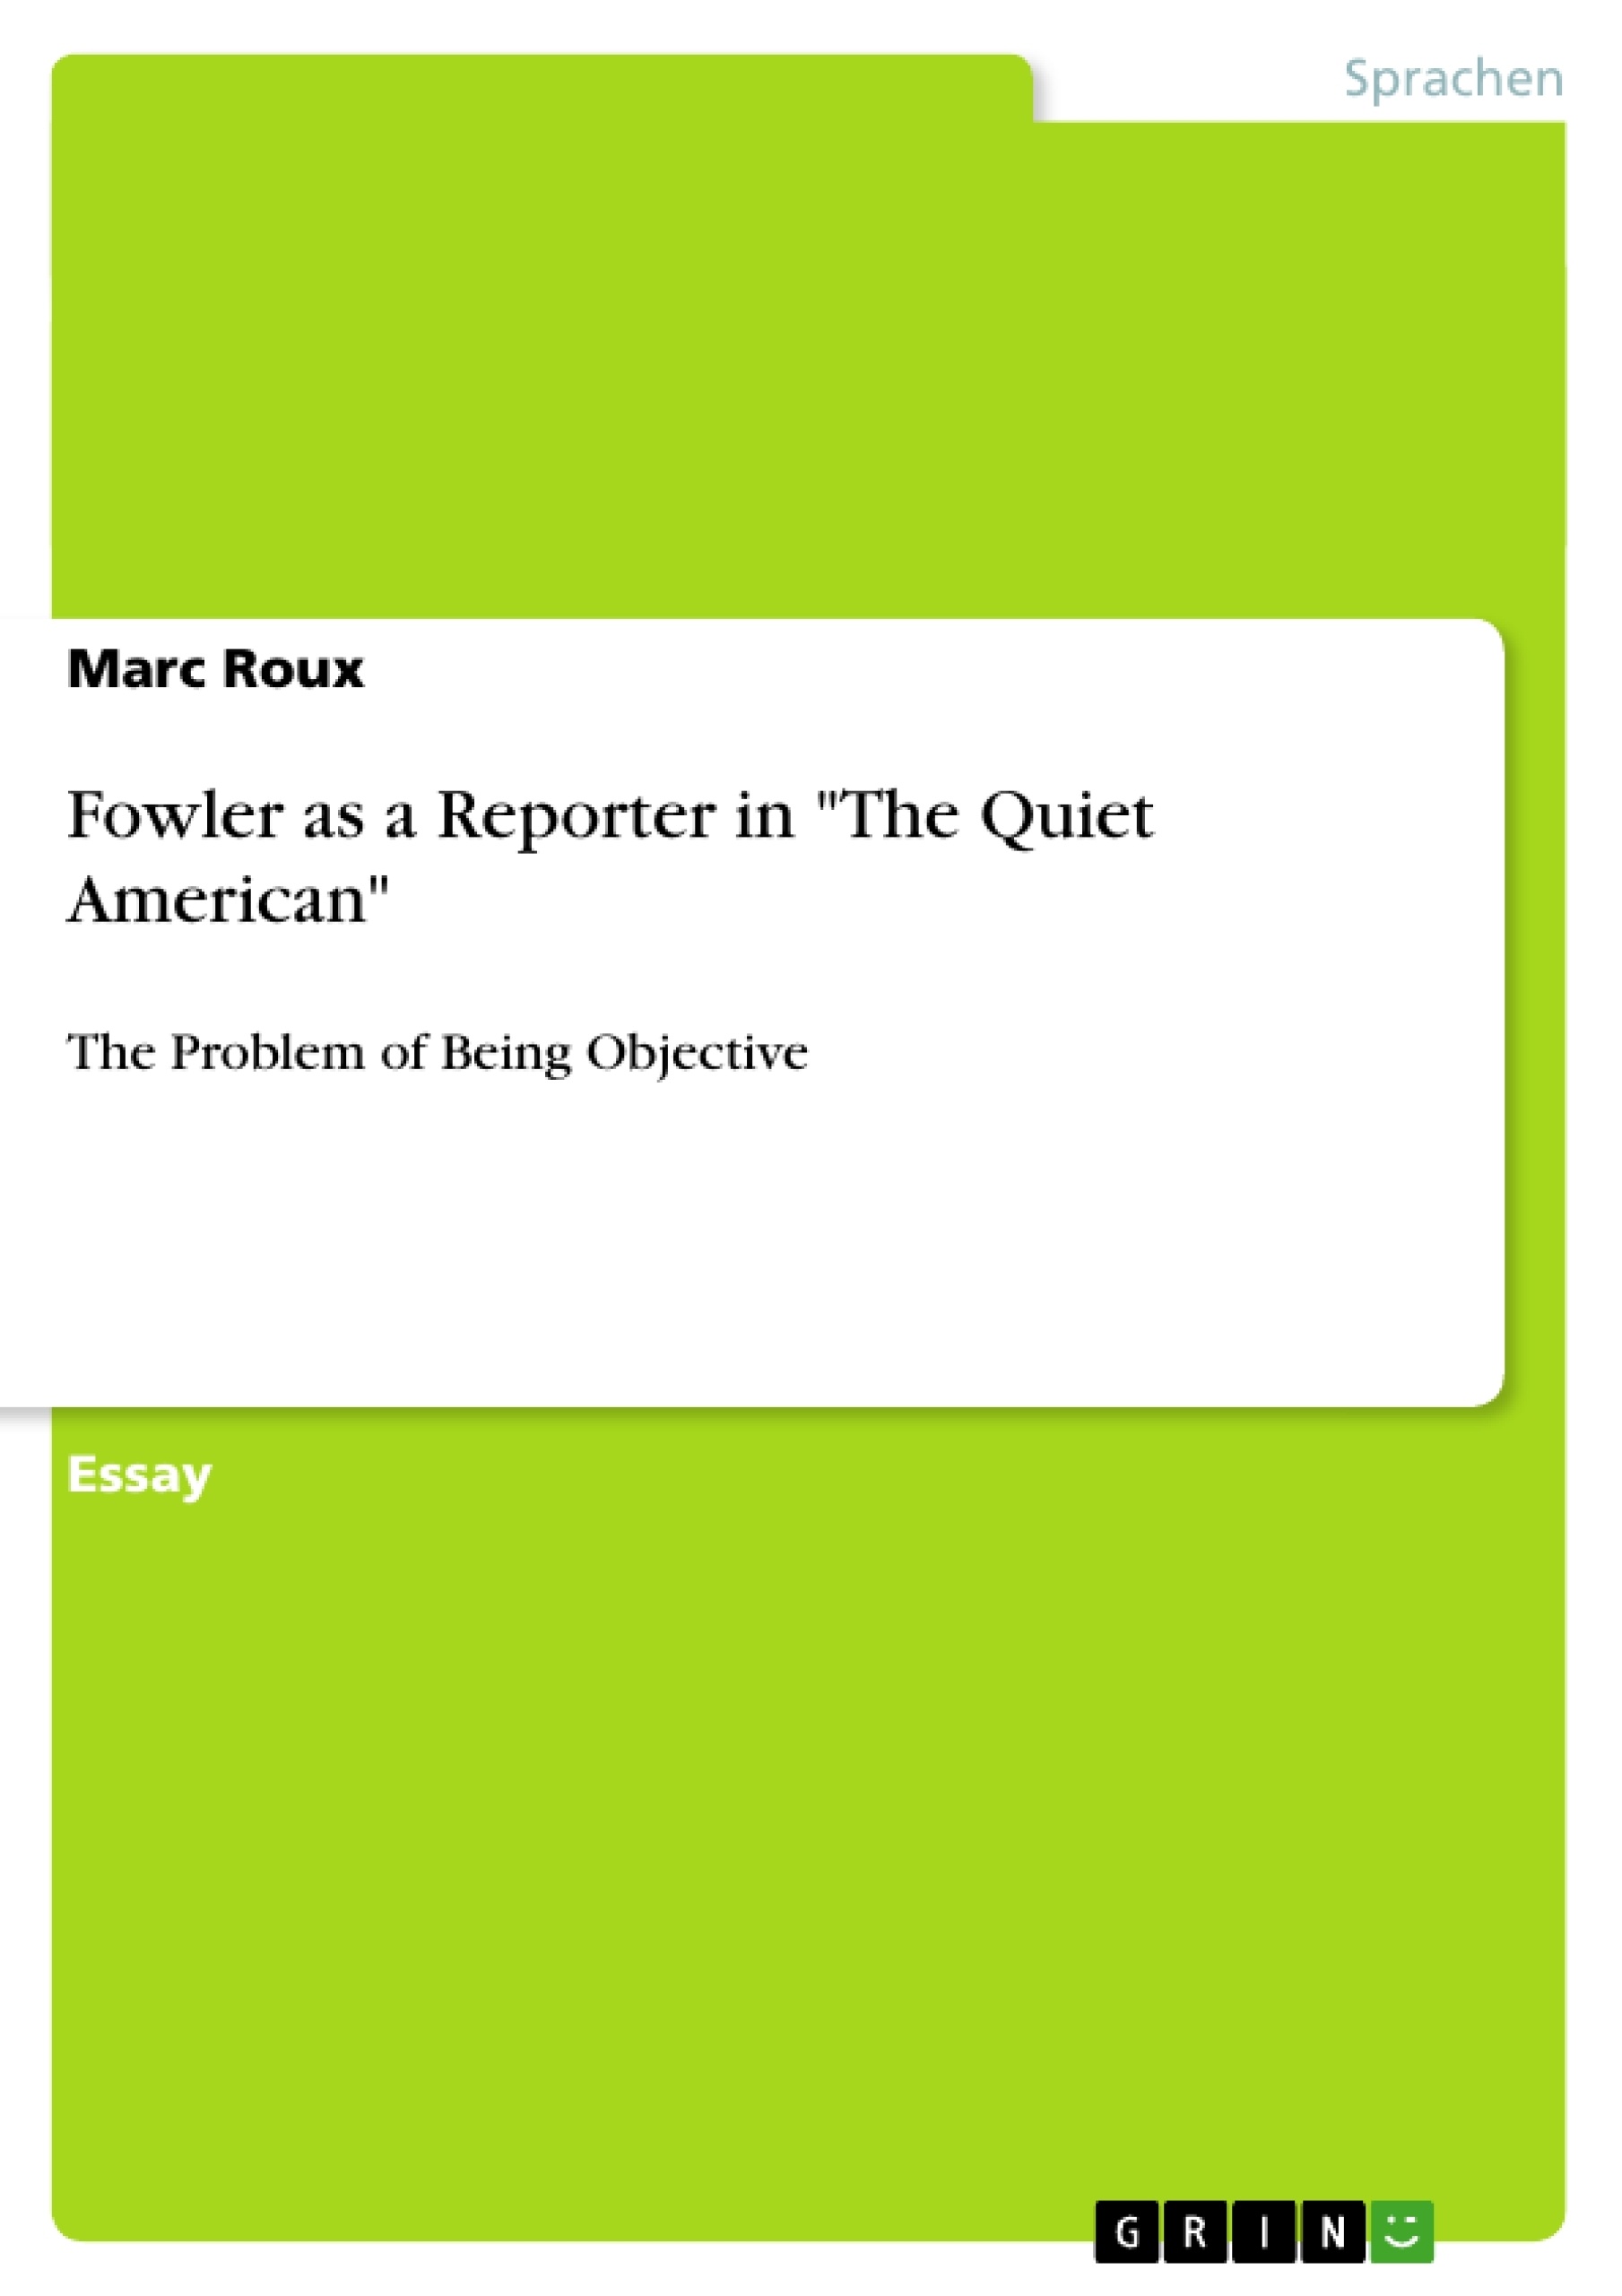 Titre: Fowler as a Reporter in "The Quiet American"